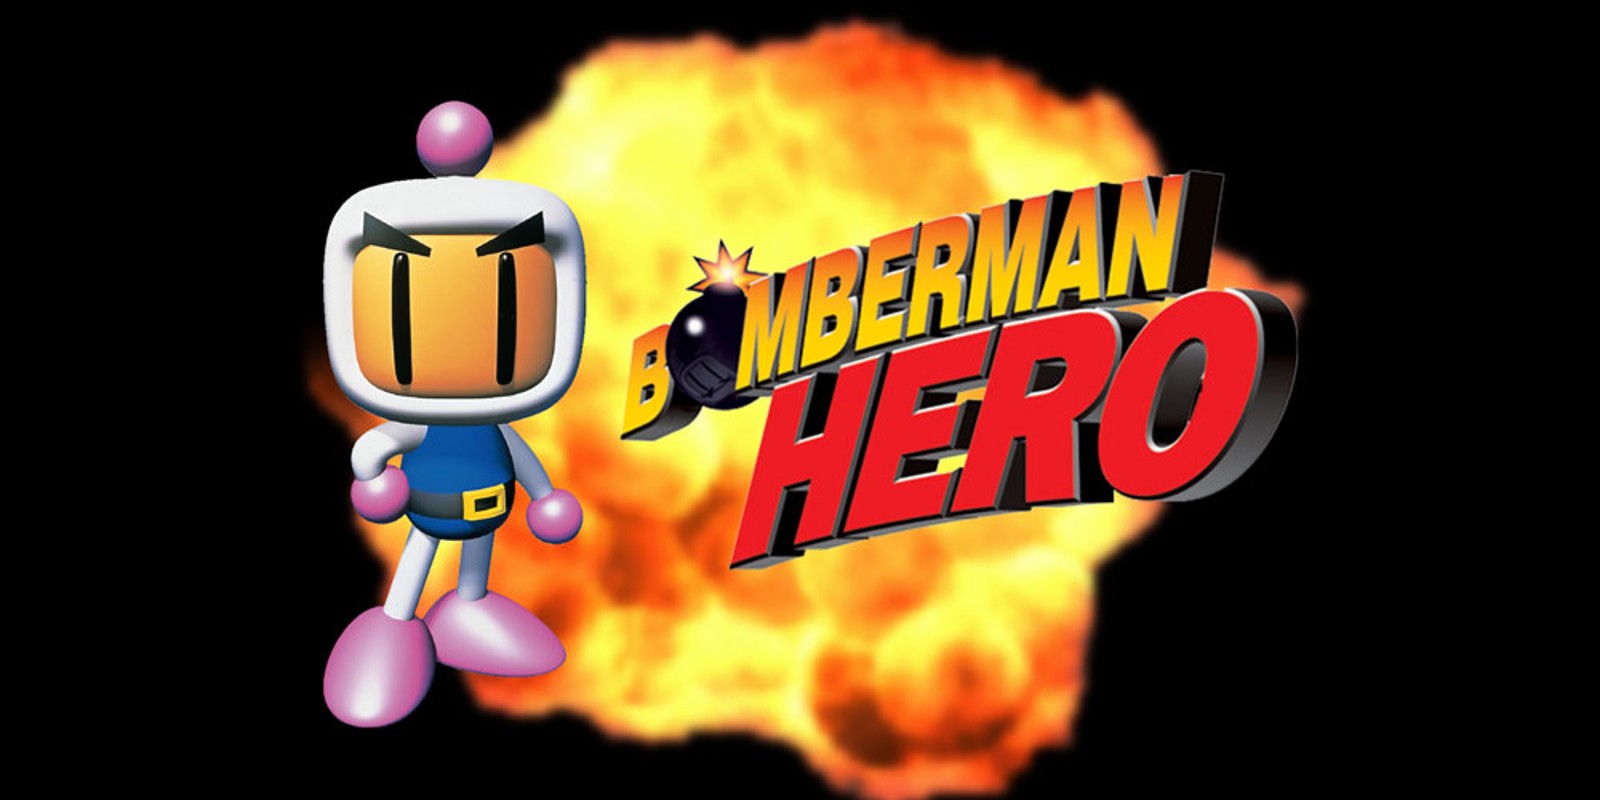 download the last version for ipod Bomber Bomberman!